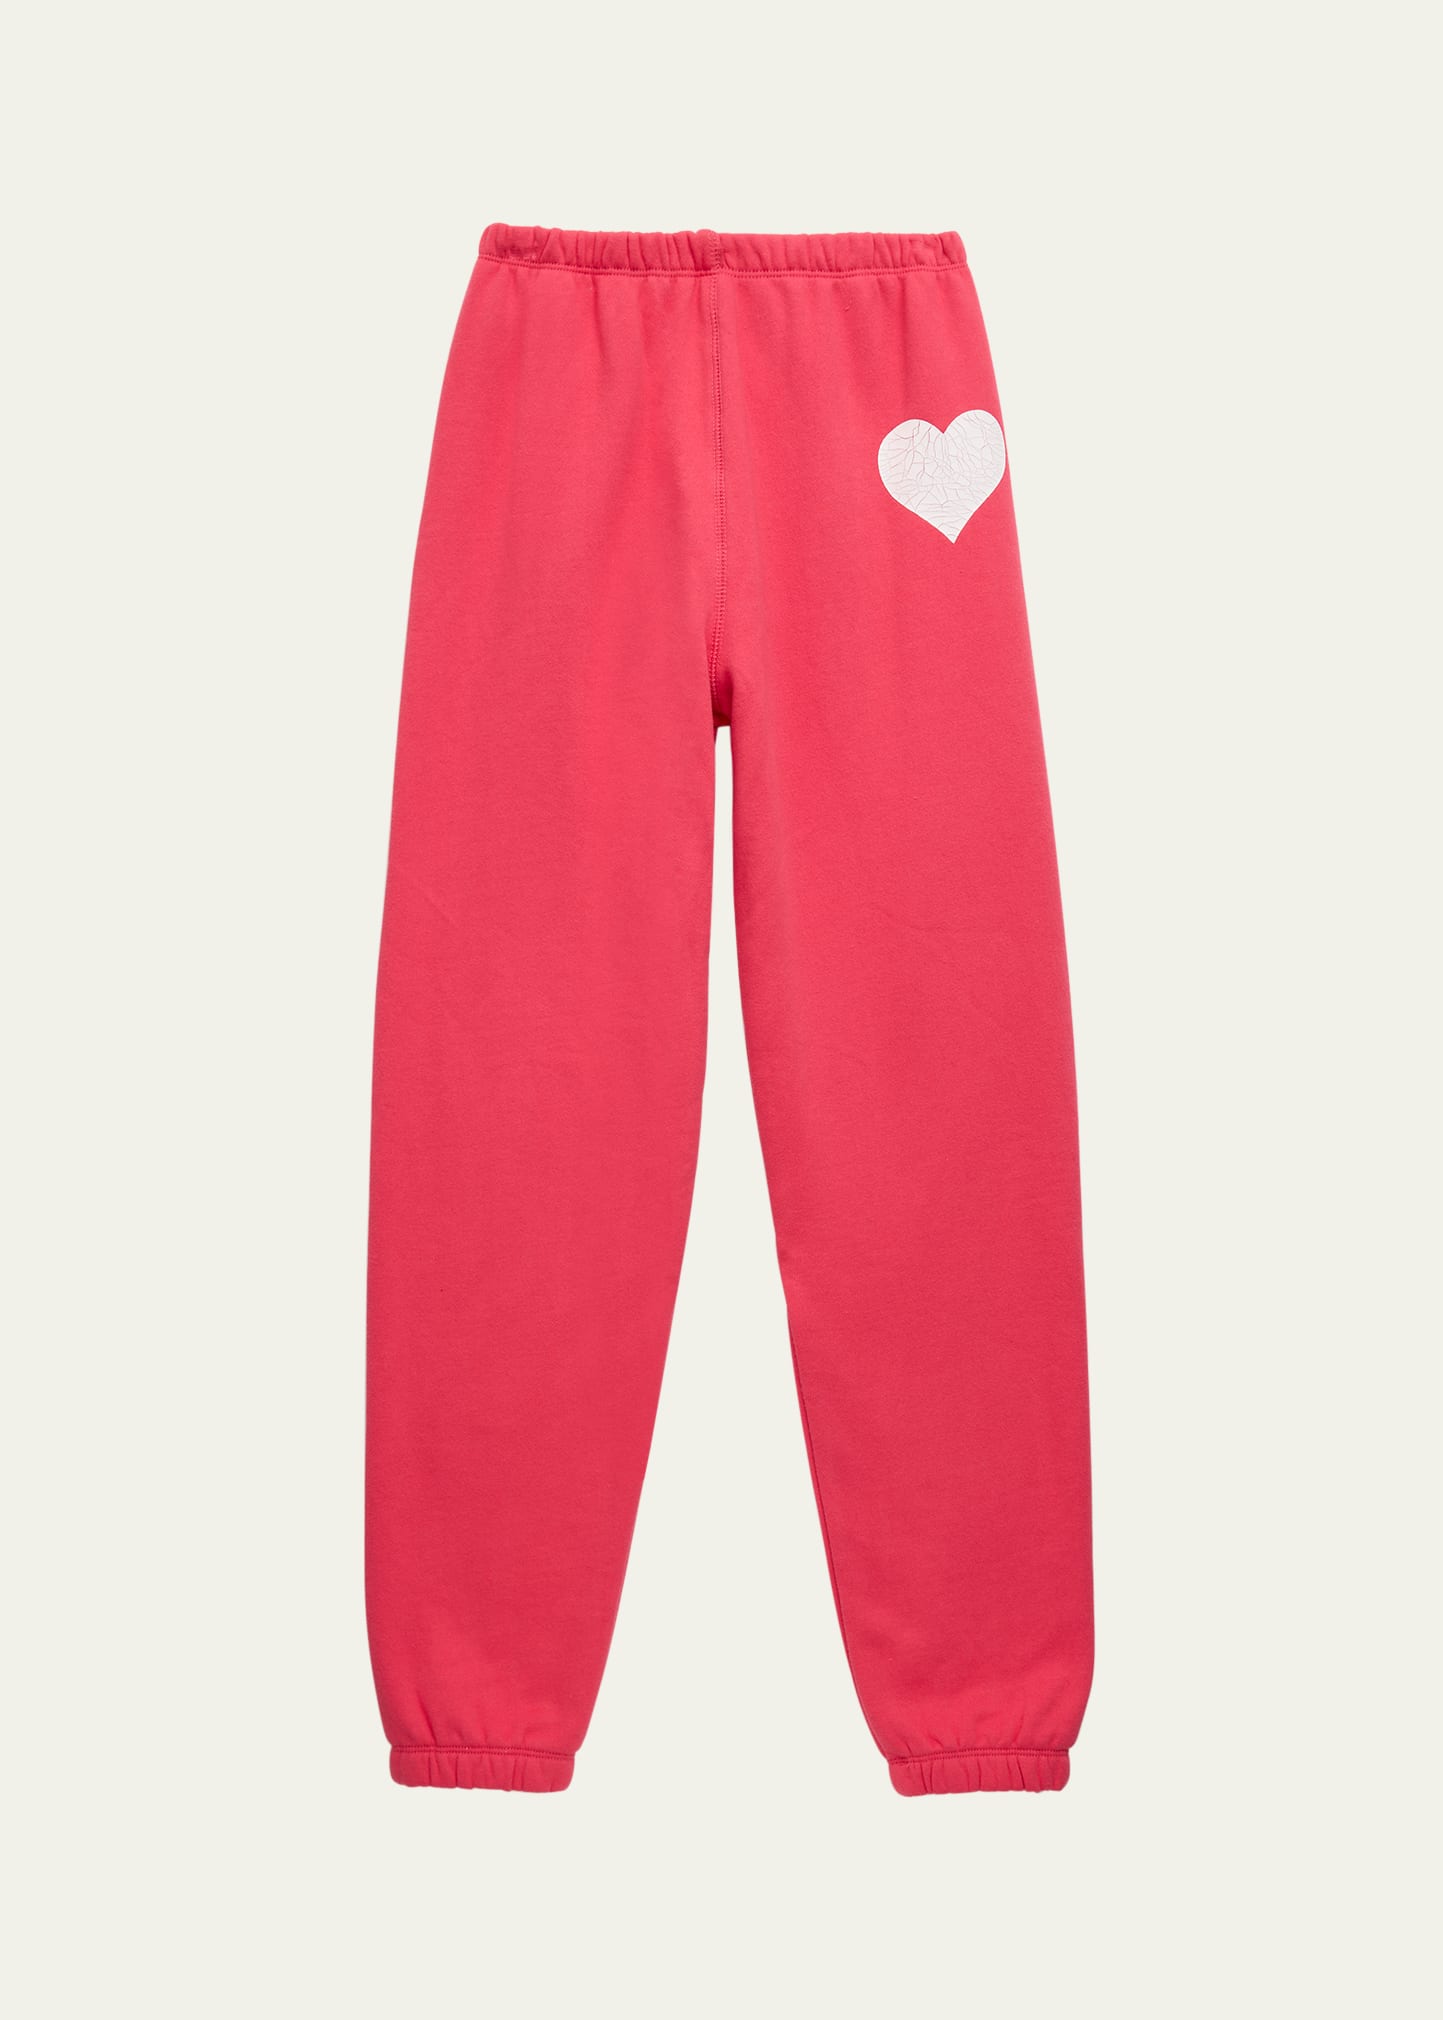 Girl's Shane Heart Graphic Sweatpants, Size S-XL